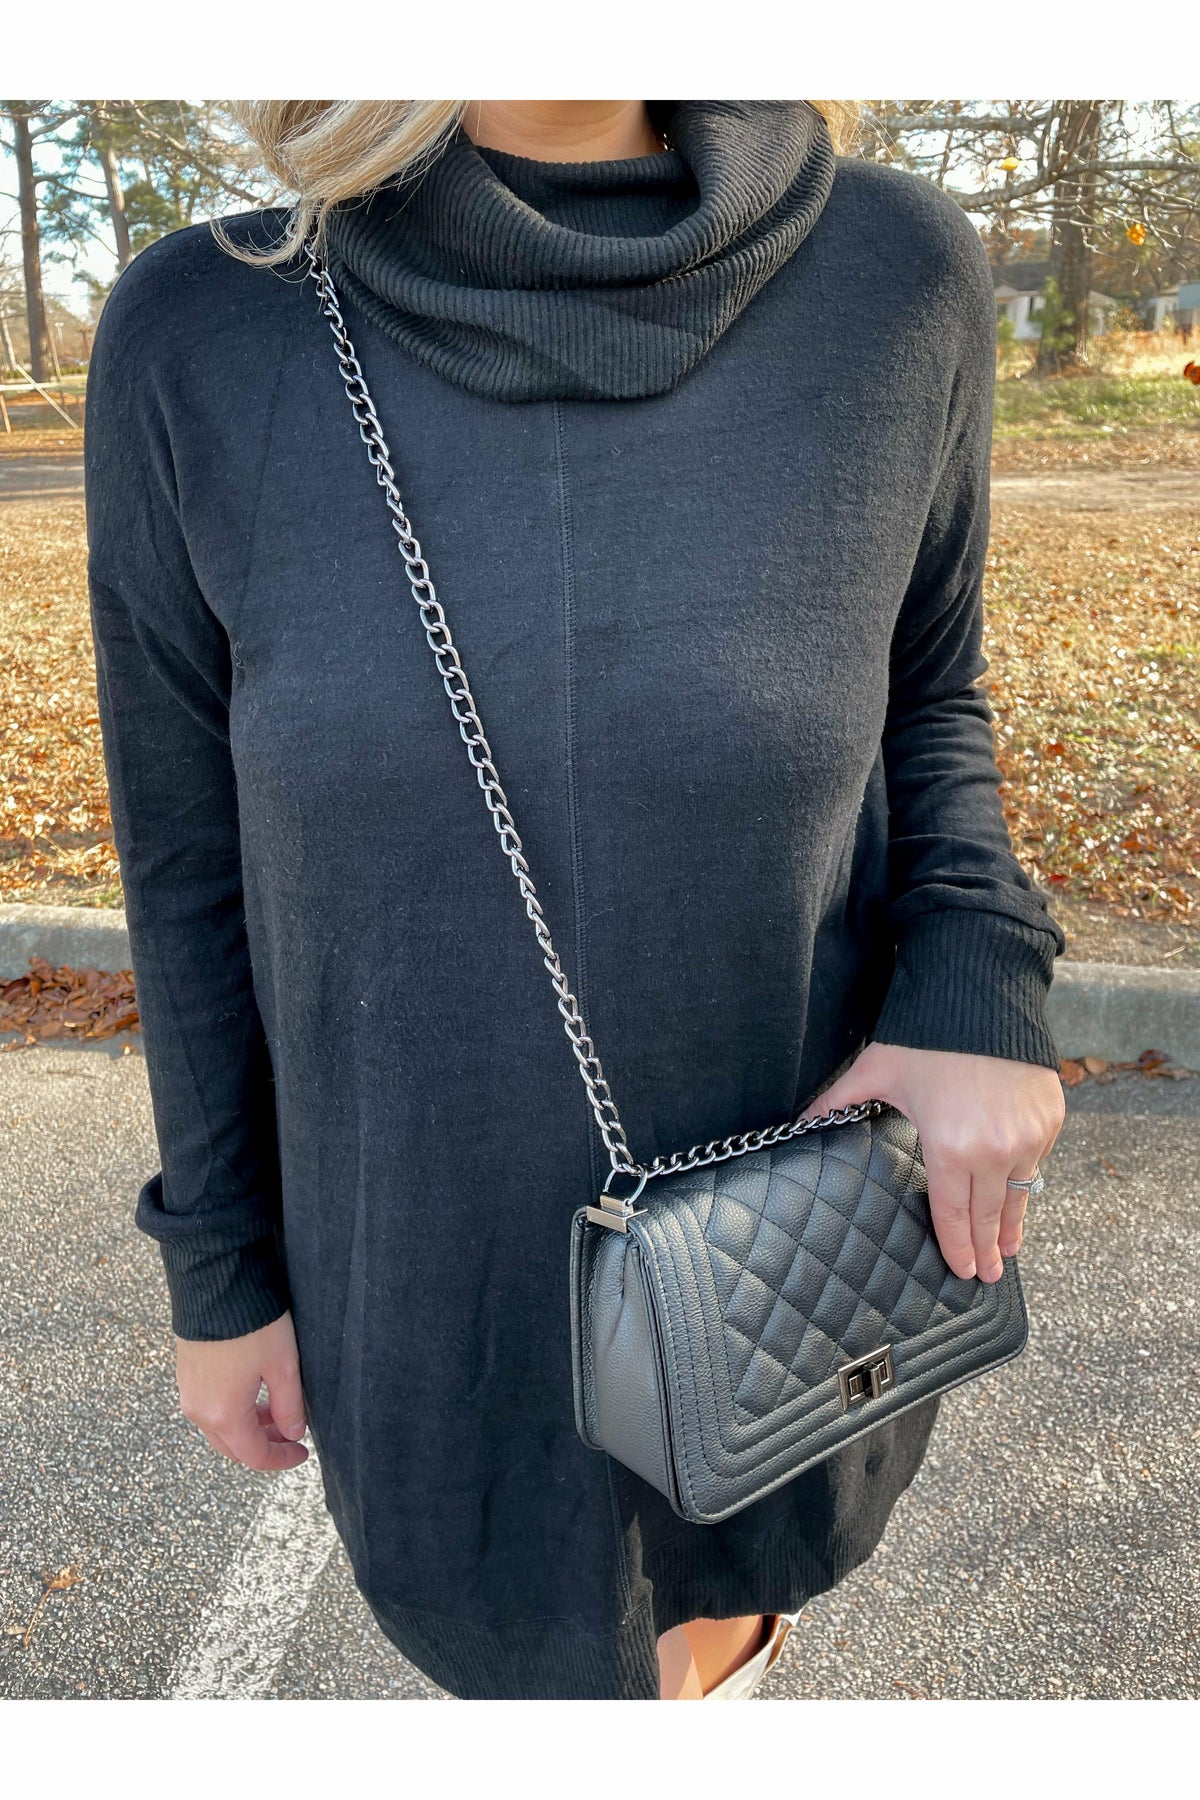 Saint Quilted Crossbody Bag